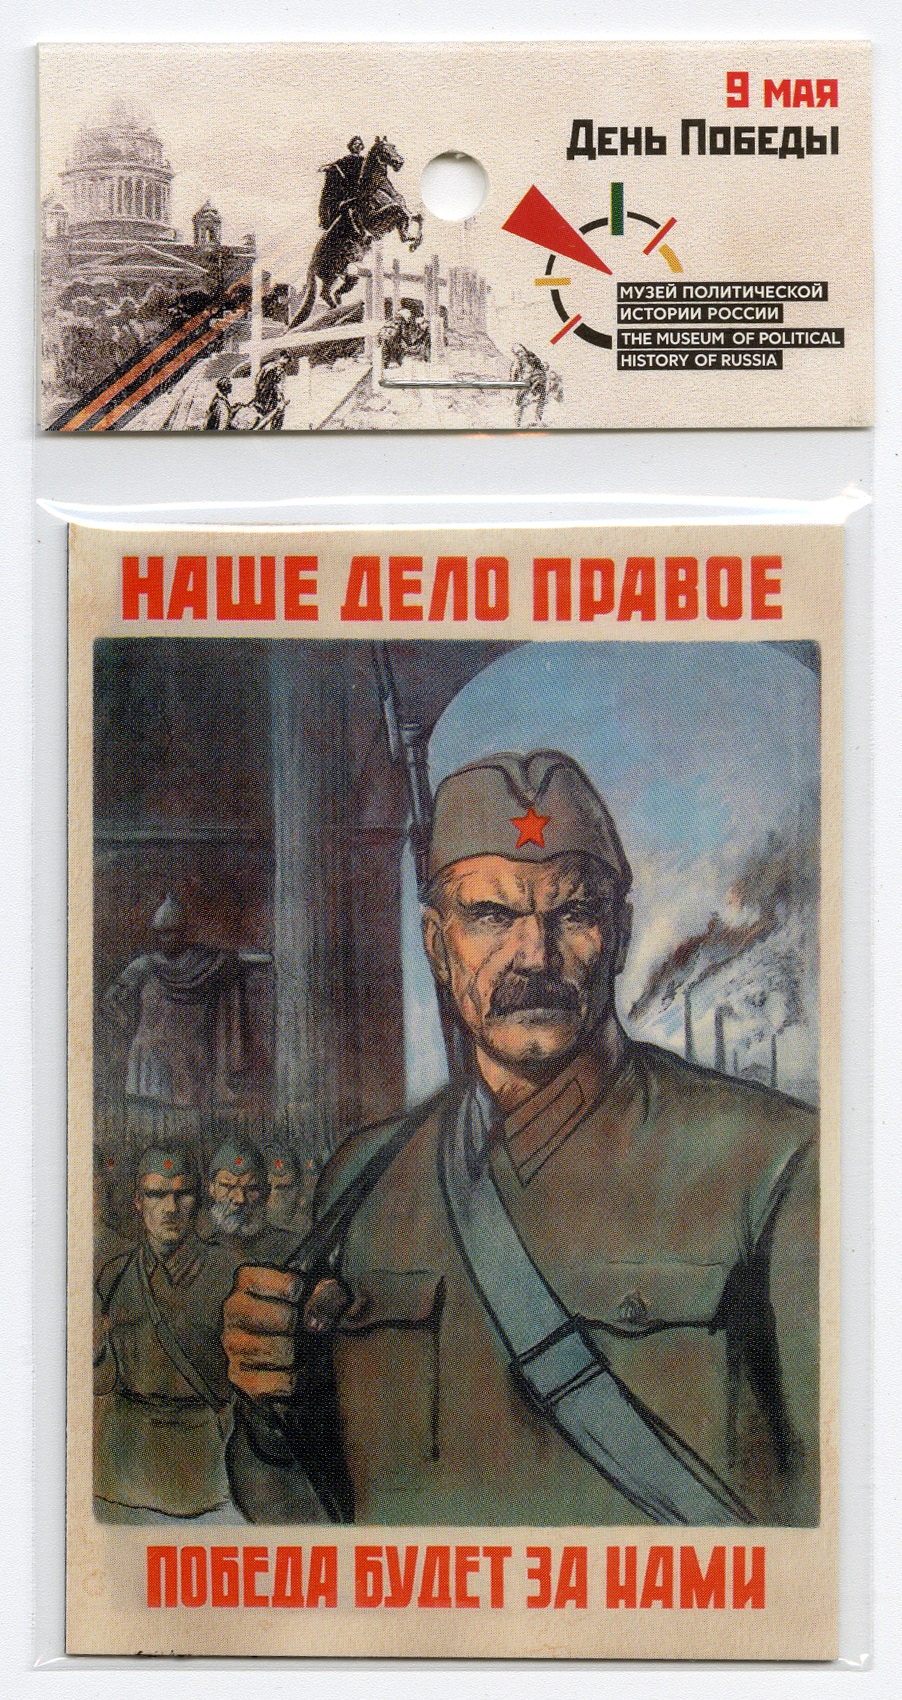 «Our cause is right. Victory will be ours» (The Great Patriotic War)